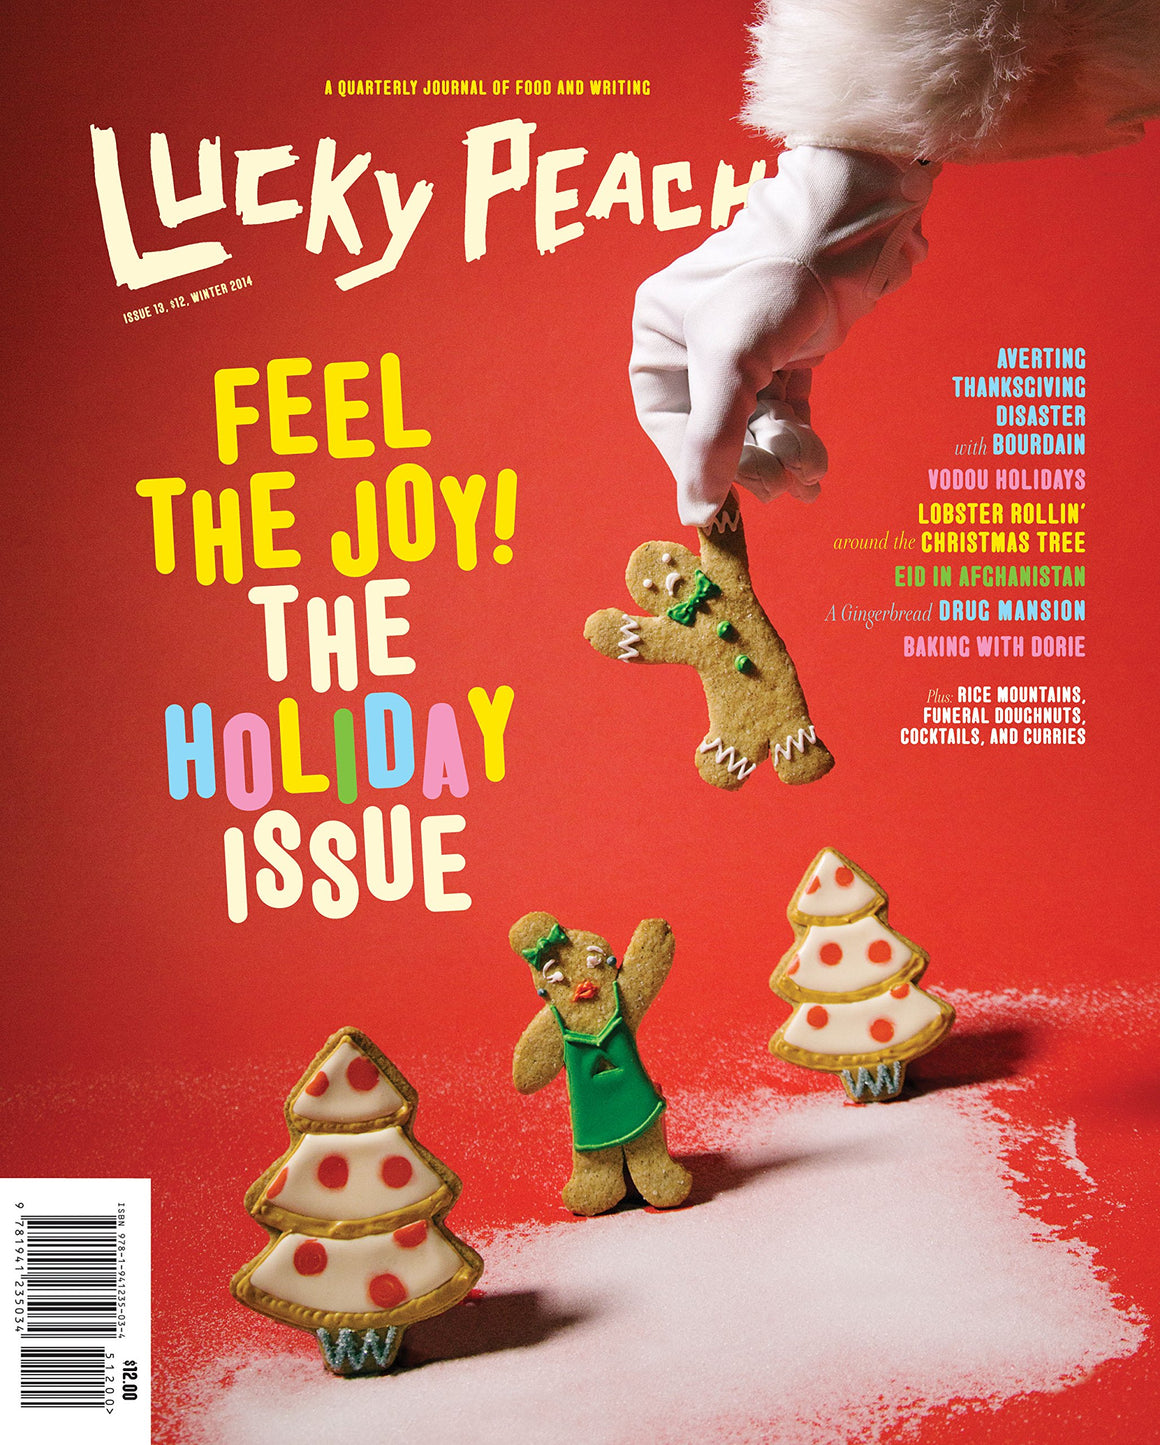 (Magazine) Lucky Peach. Issue 13. Feel the Joy: The Holiday Issue.